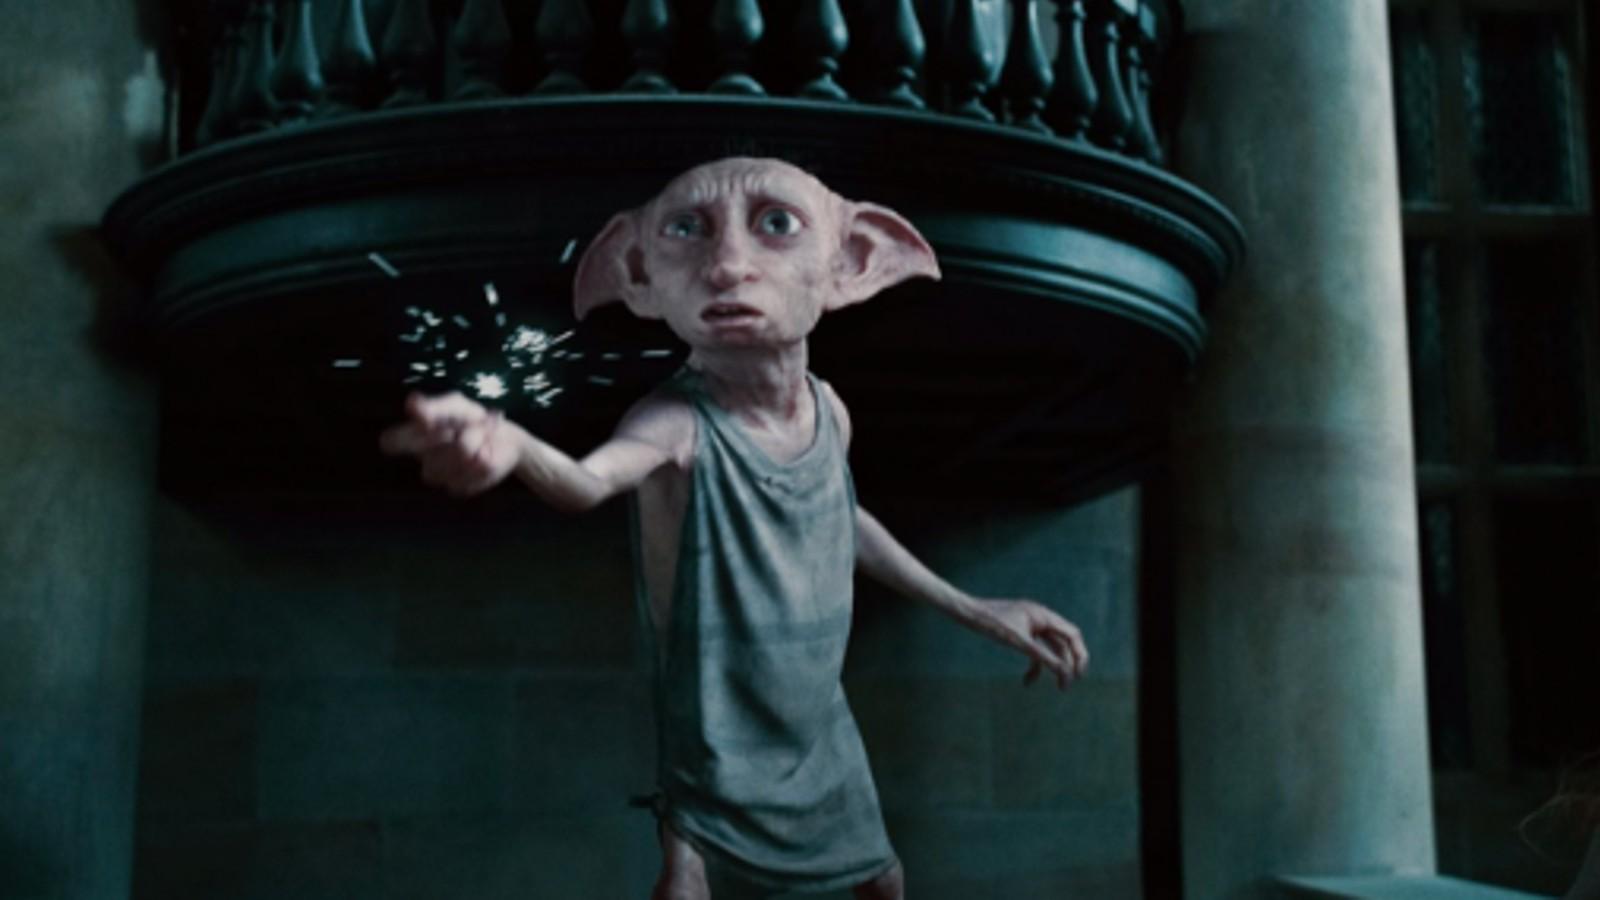 Dobby the house-elf in Harry Potter